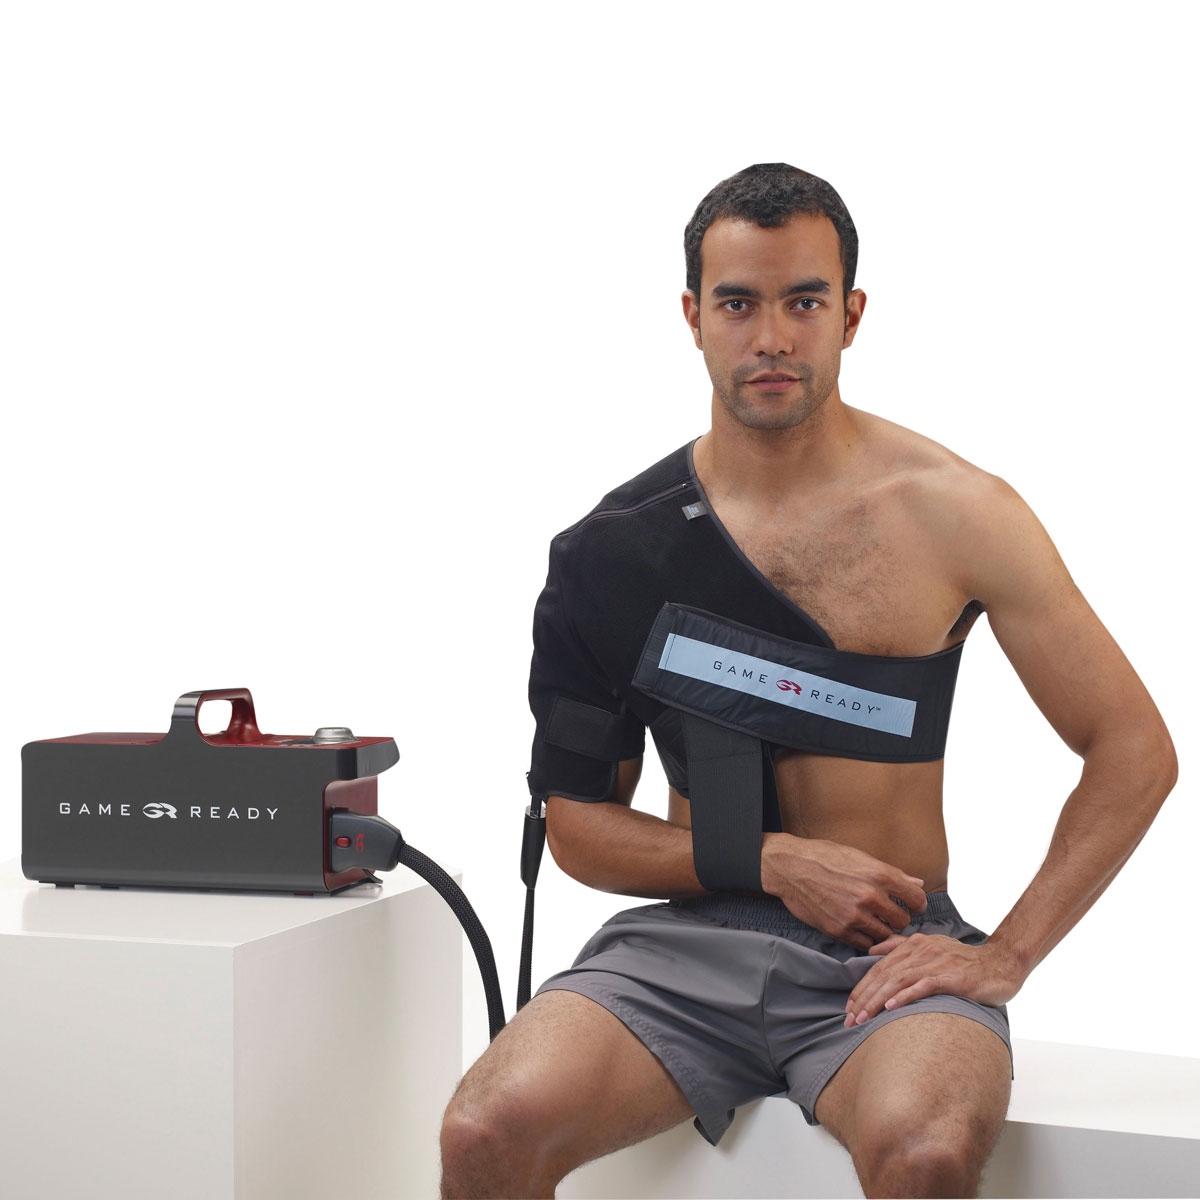 https://www.3bscientific.com/thumblibrary/3009481/3009481_01_1200_1200_Shoulder-Wrap-with-ATX-Large-Left-fits-chest-sizes-40-55.jpg